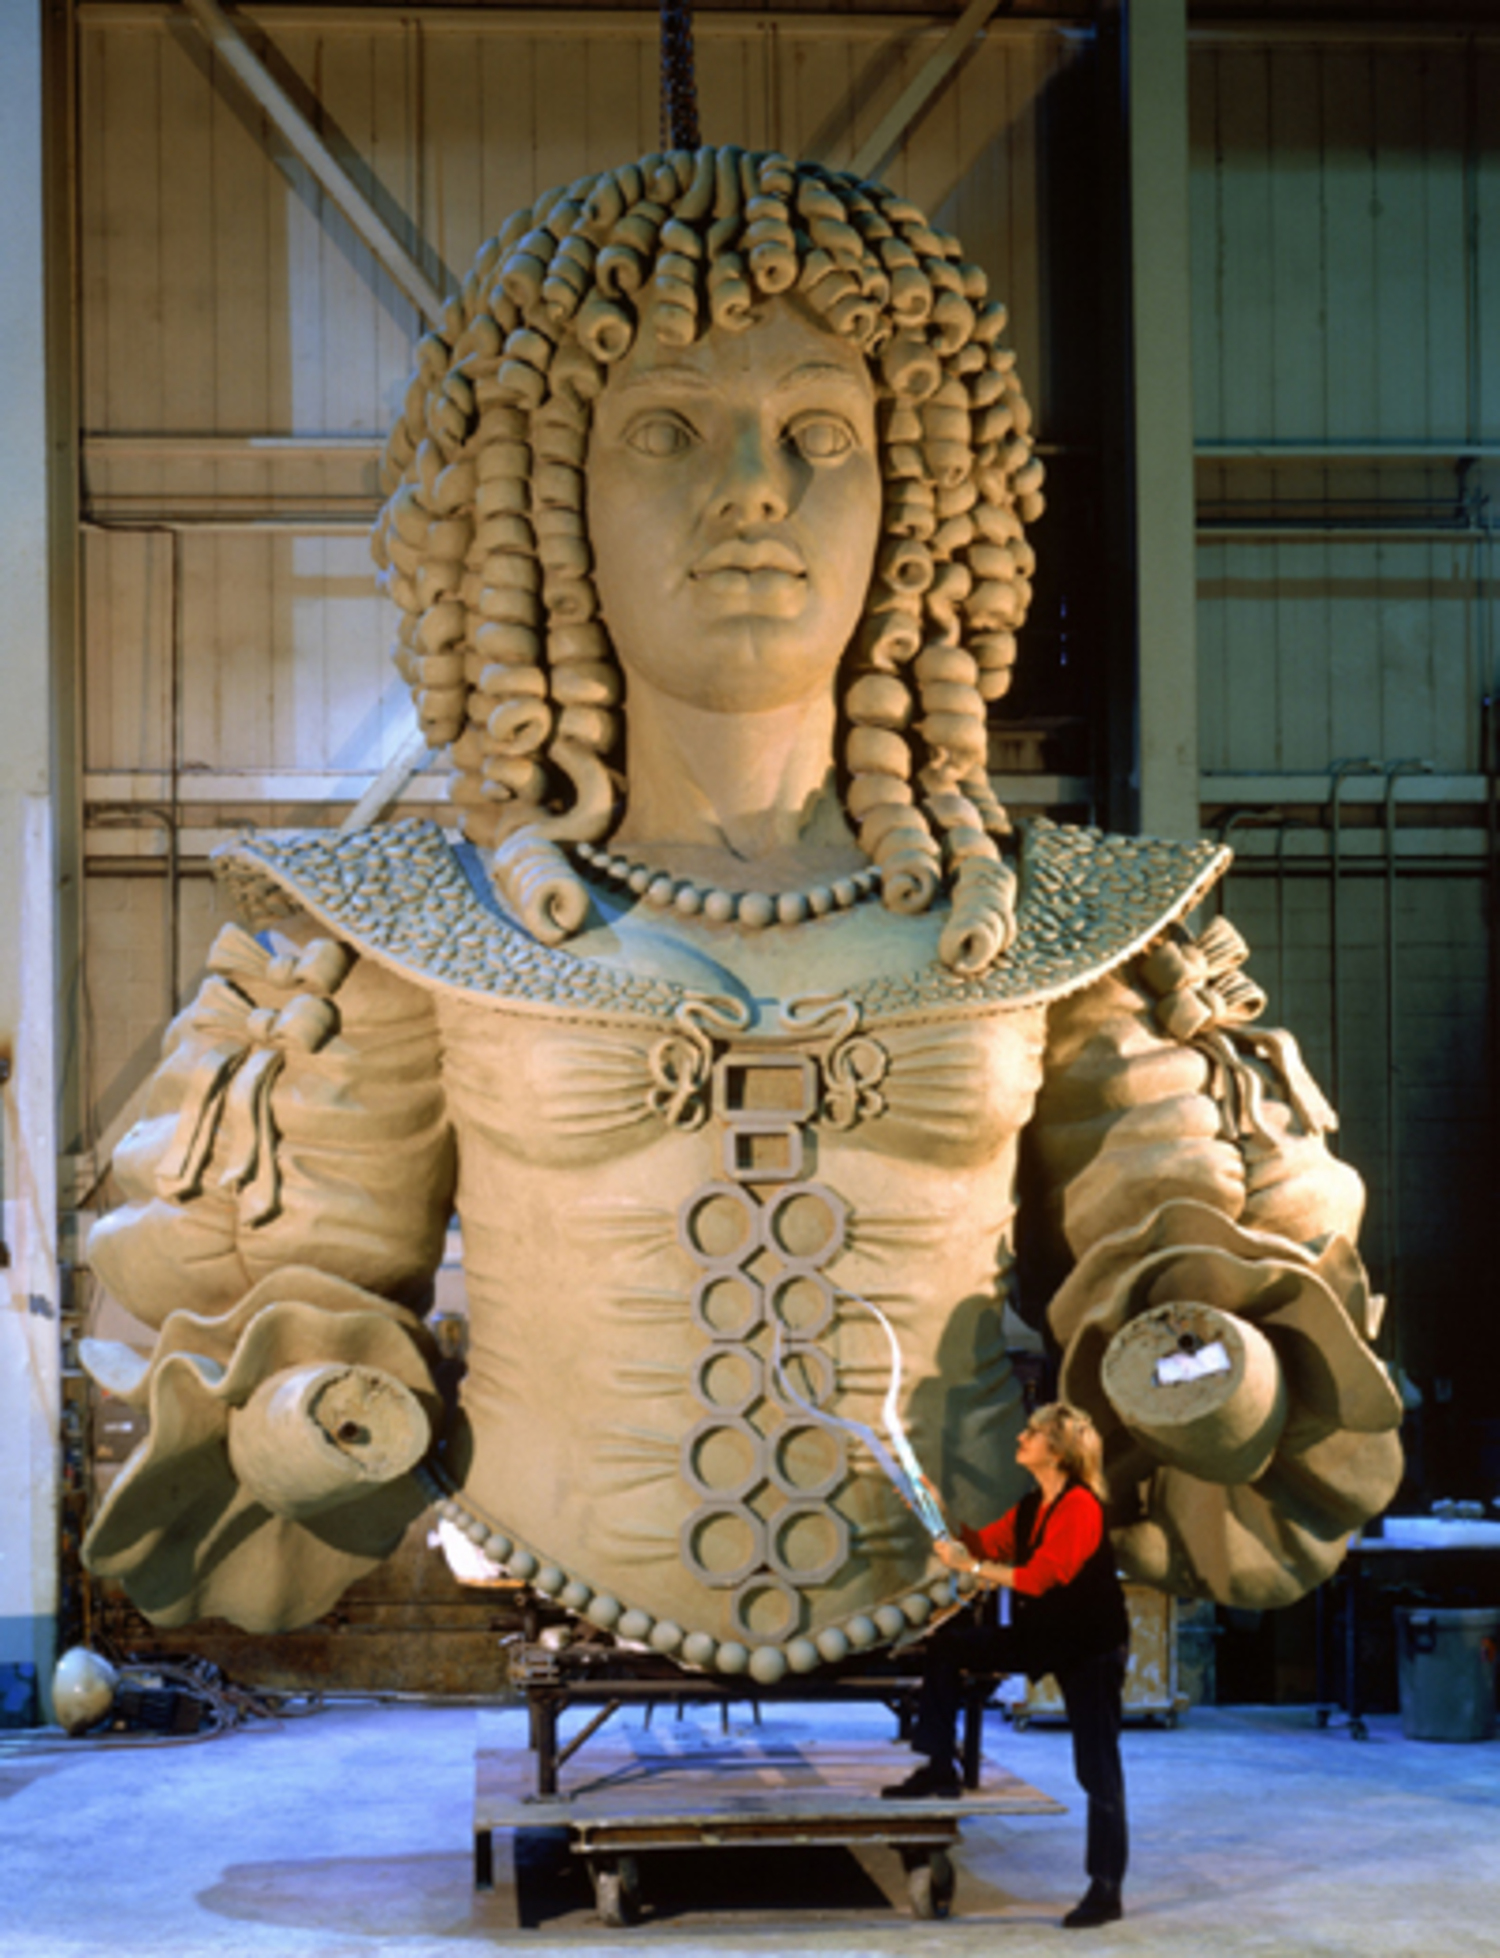 Audrey Flack at work on her statue of Queen Catherine of Braganza in the 1980s. COURTESY LOUIS MEISEL